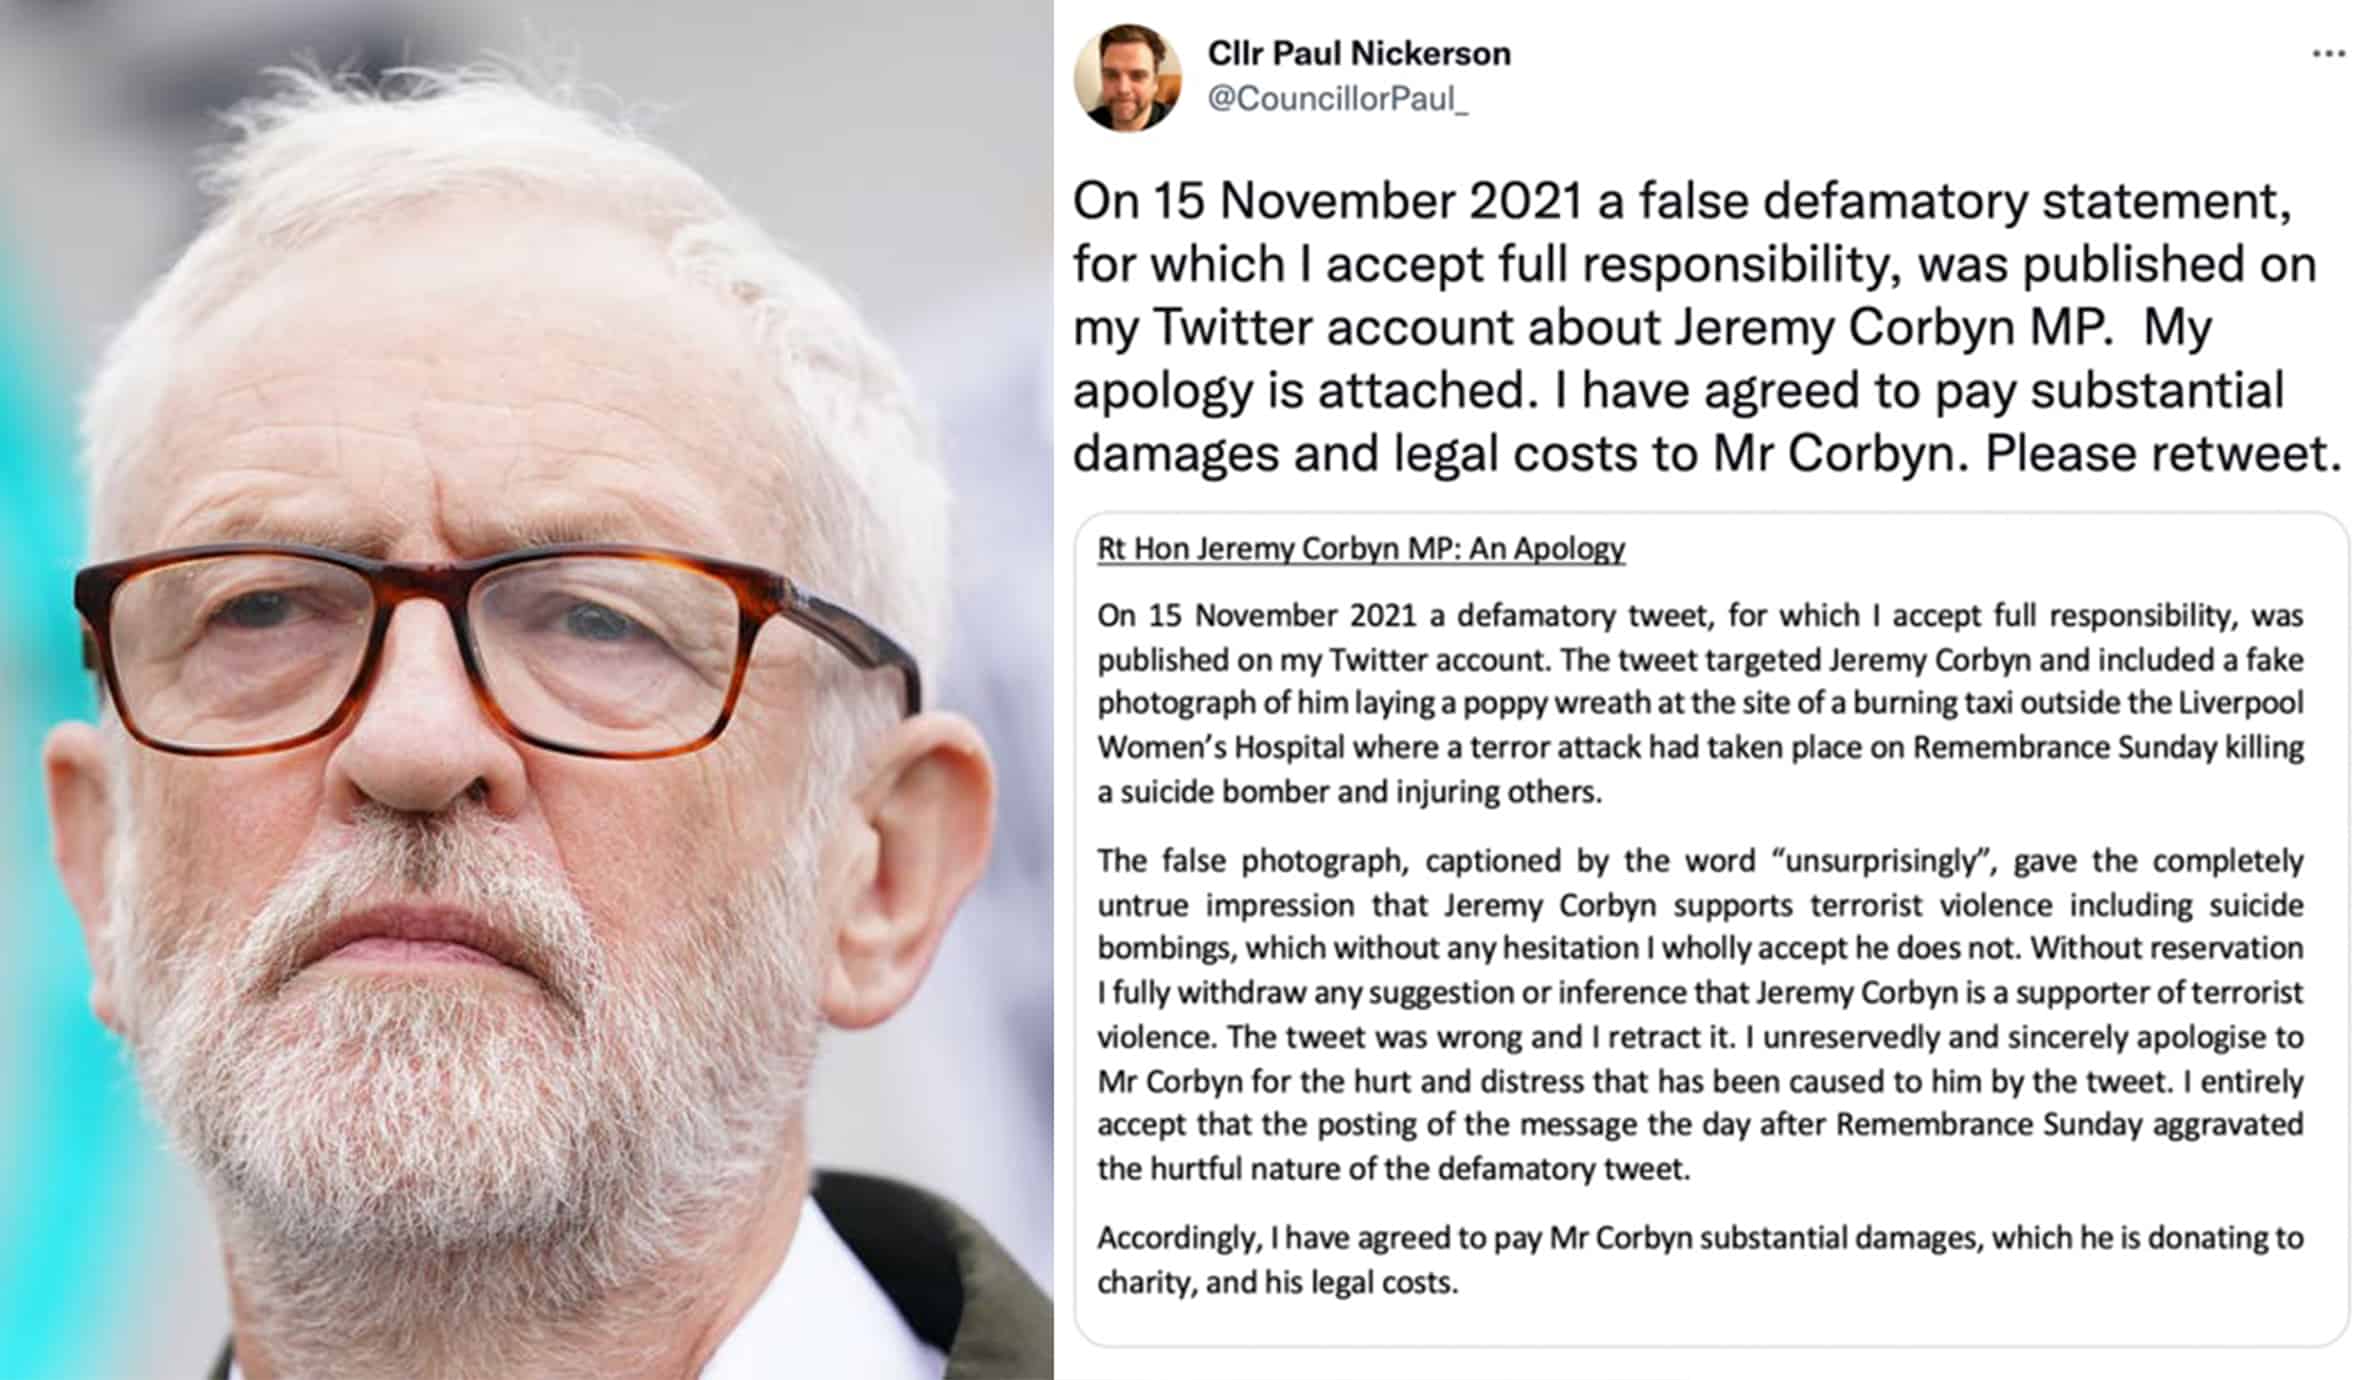 Tory councillor to pay ‘substantial damages’ to Corbyn